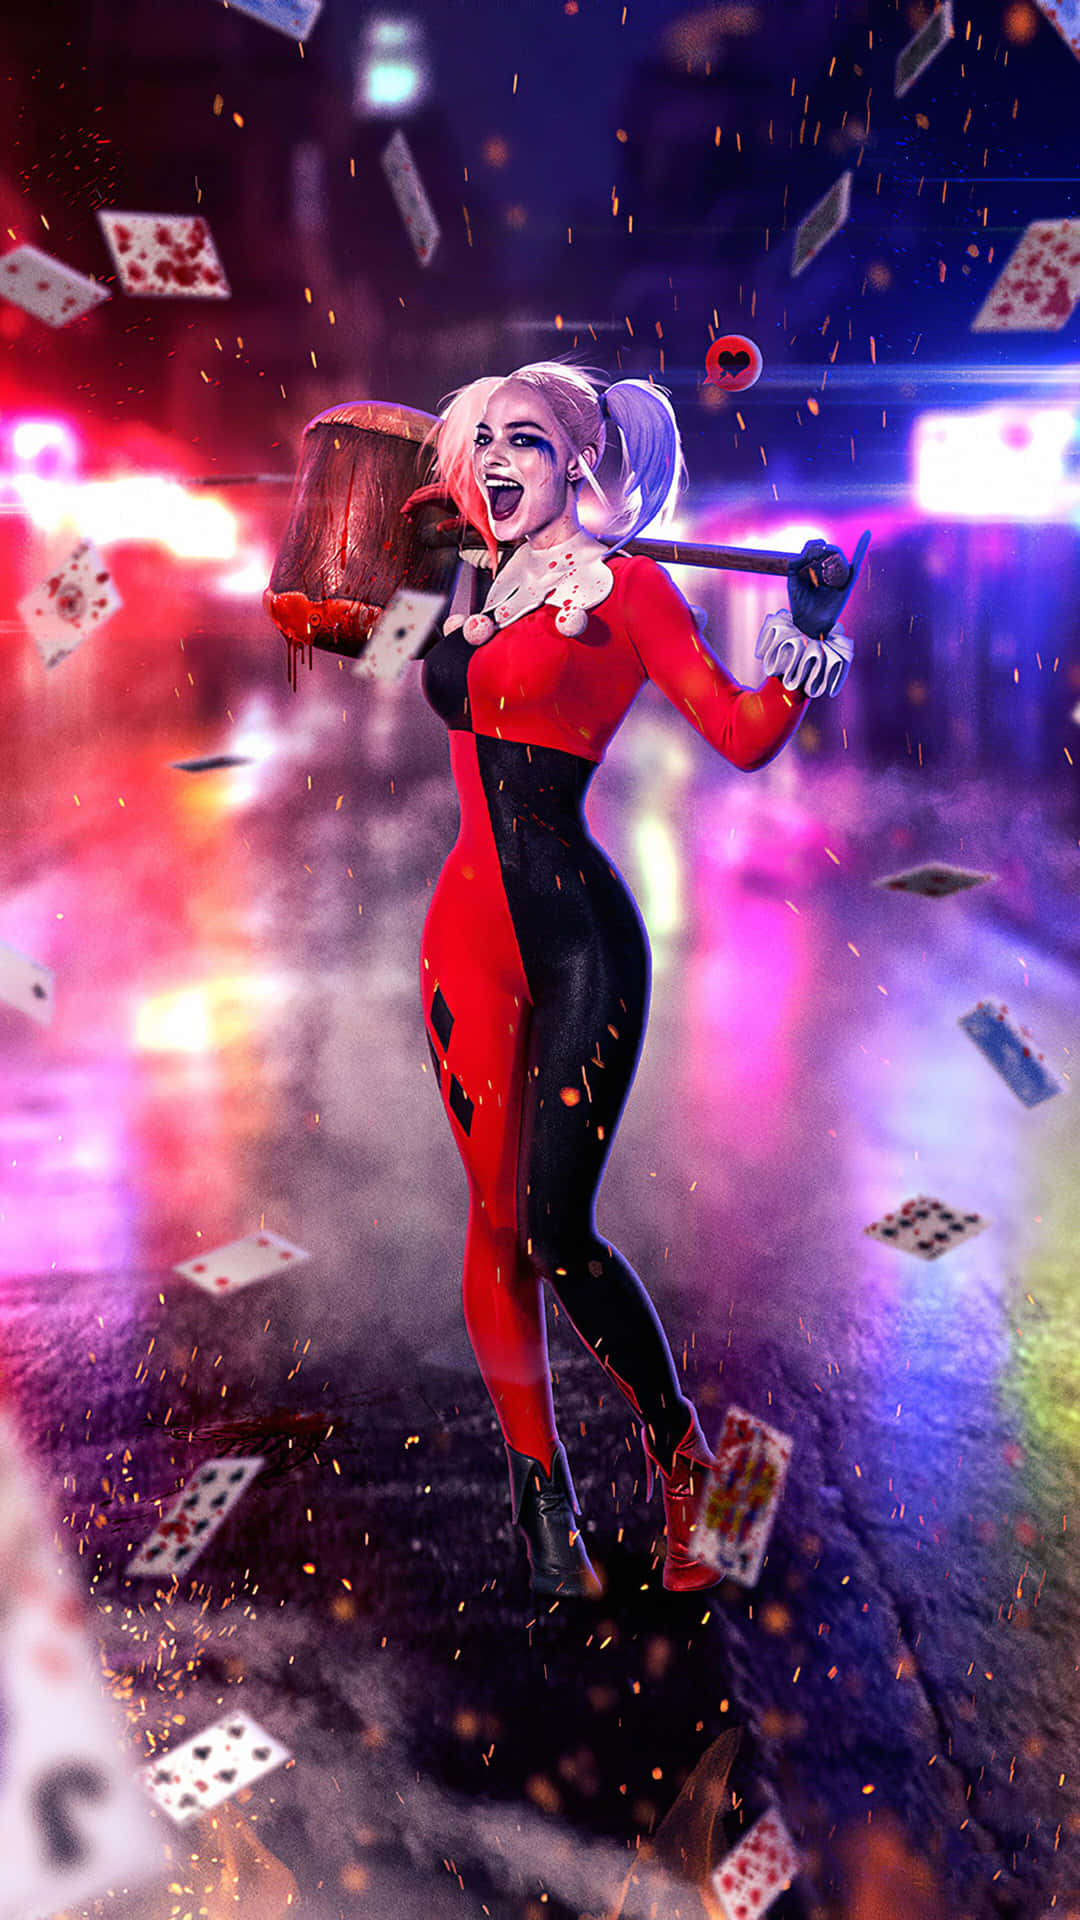 Harley Quinn wielding her iconic hammer in action Wallpaper